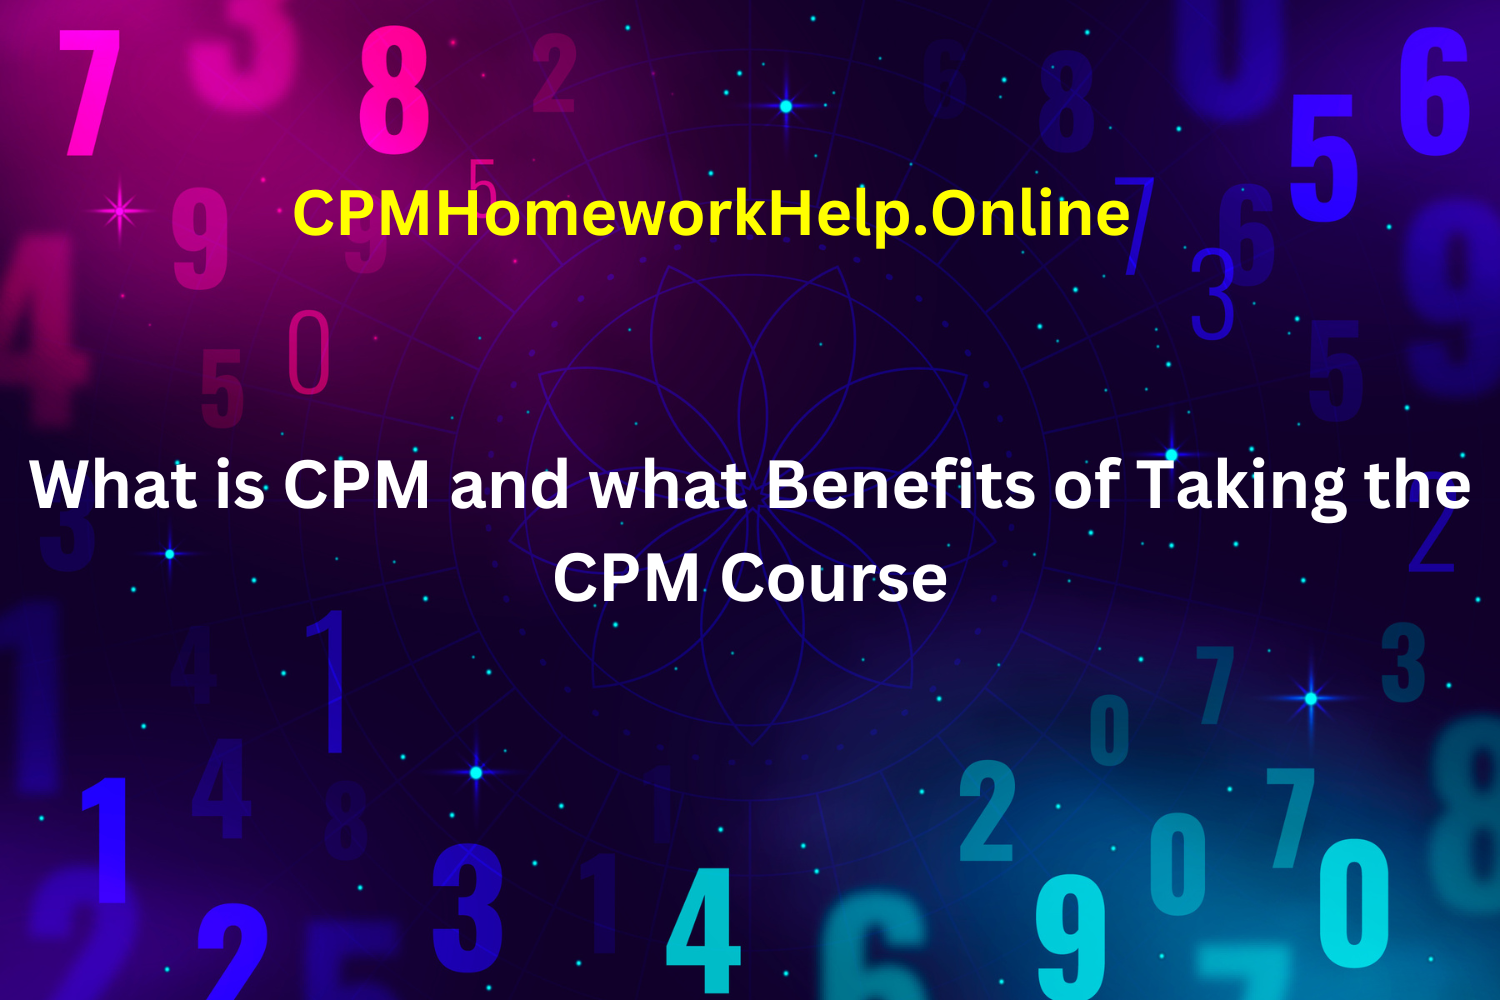 what is cpm and benefits of taking cpm course